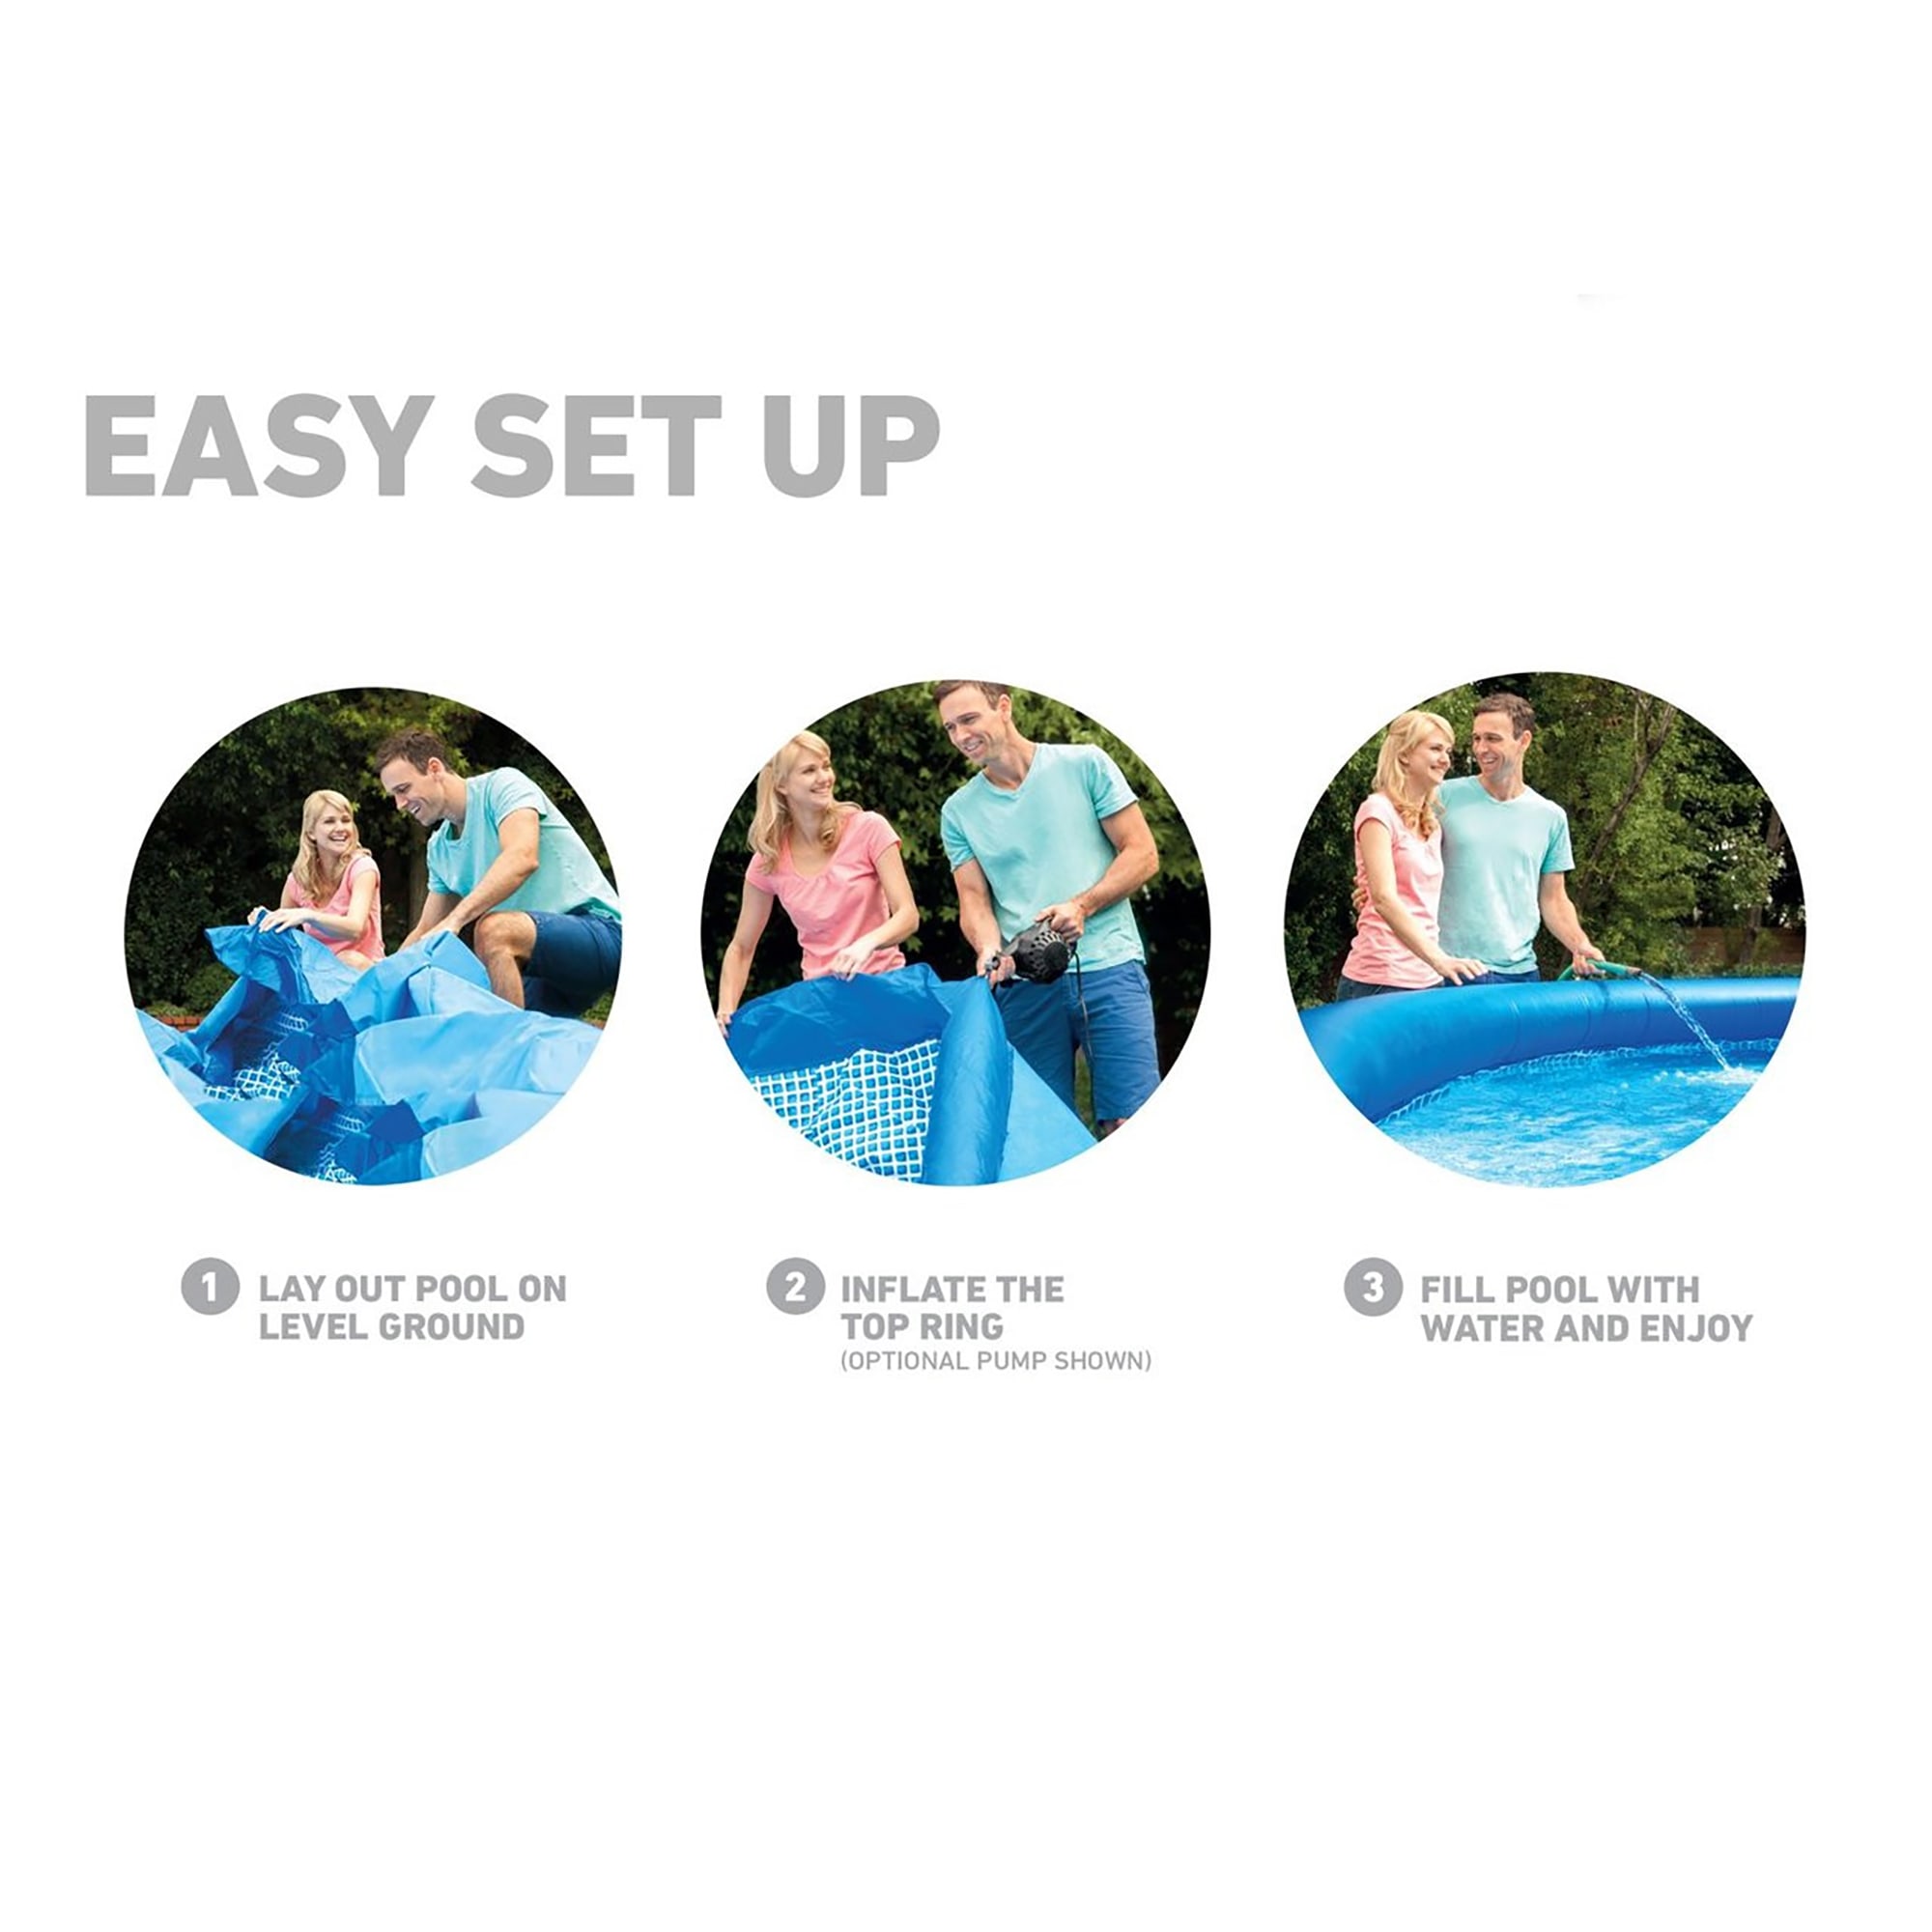 Intex: Easy Set 18' x 48" Inflatable Pool w/ Filter Pump, Above Ground Pool Set, 5455 Gallon Capacity, Hydro Aeration Technology, Includes Filter Pump, Ground Cloth, Pool Cover & Ladder,  Ages 6+ - image 5 of 12